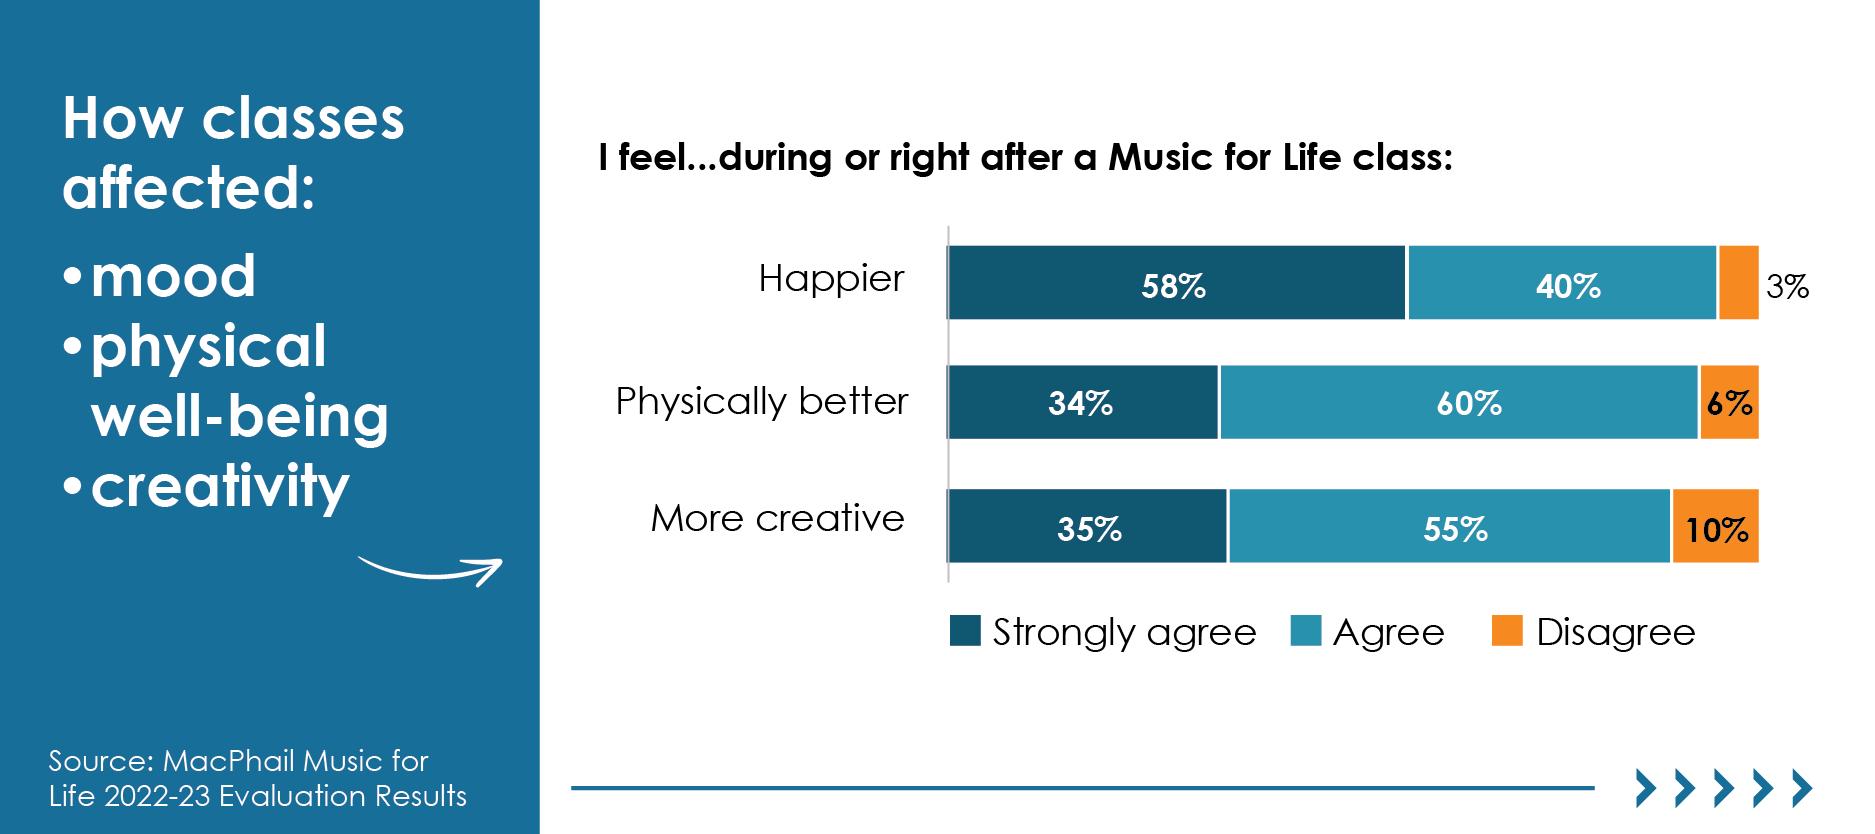 Bar graphs show that most Music for Life participants said they felt happier, physically better, and more creative after a class.